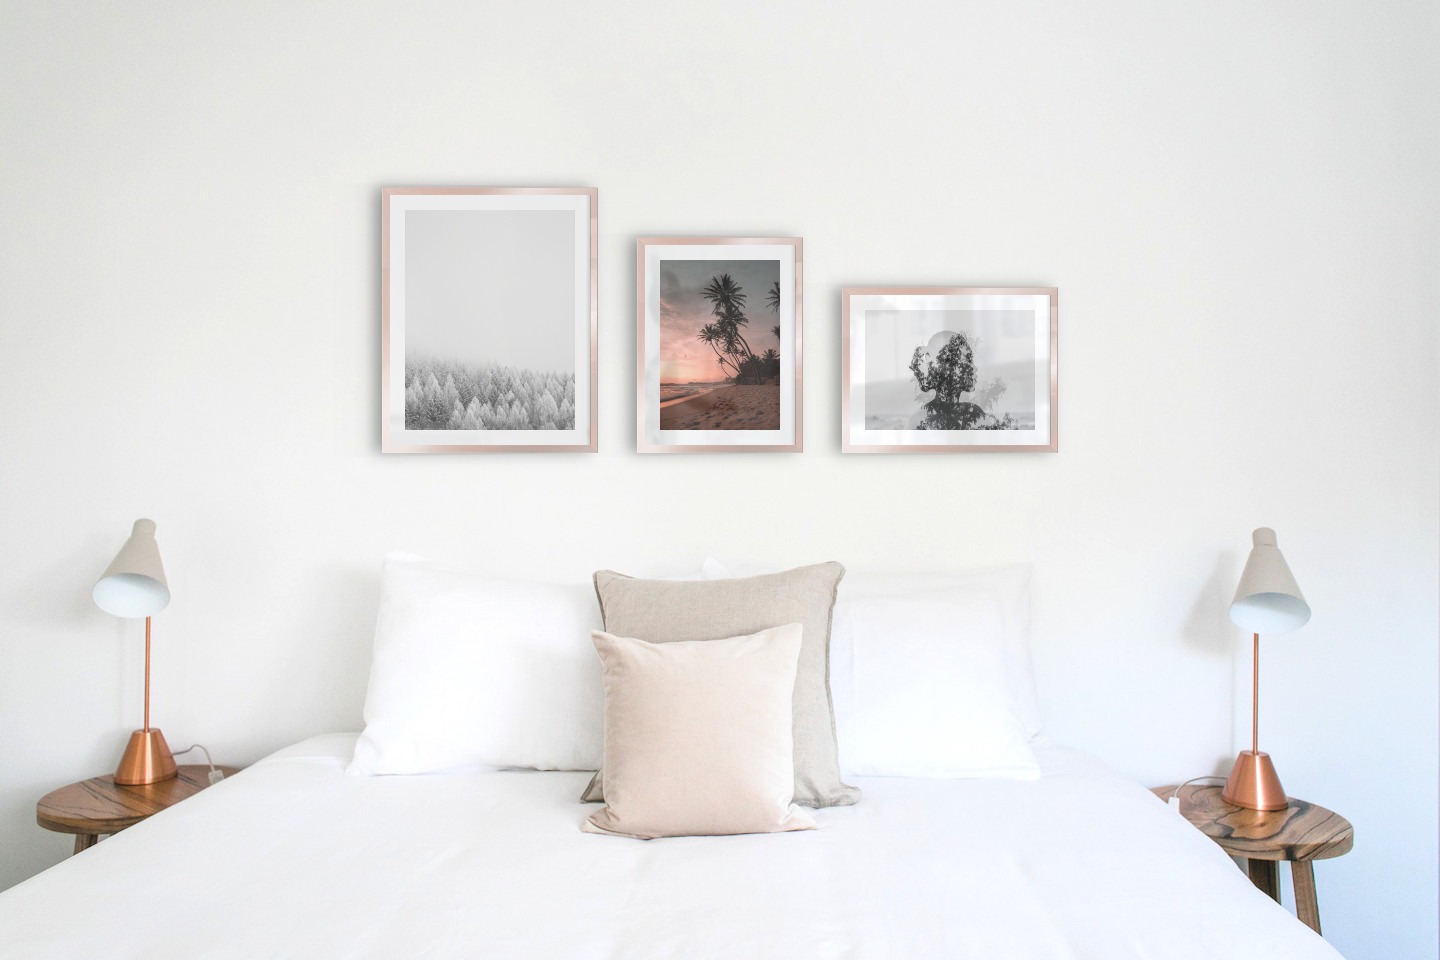 Gallery wall with picture frames in copper in sizes 40x50 and 30x40 with prints "Wooden tops in winter", "Beach at sunset" and "Trees and silhouette"